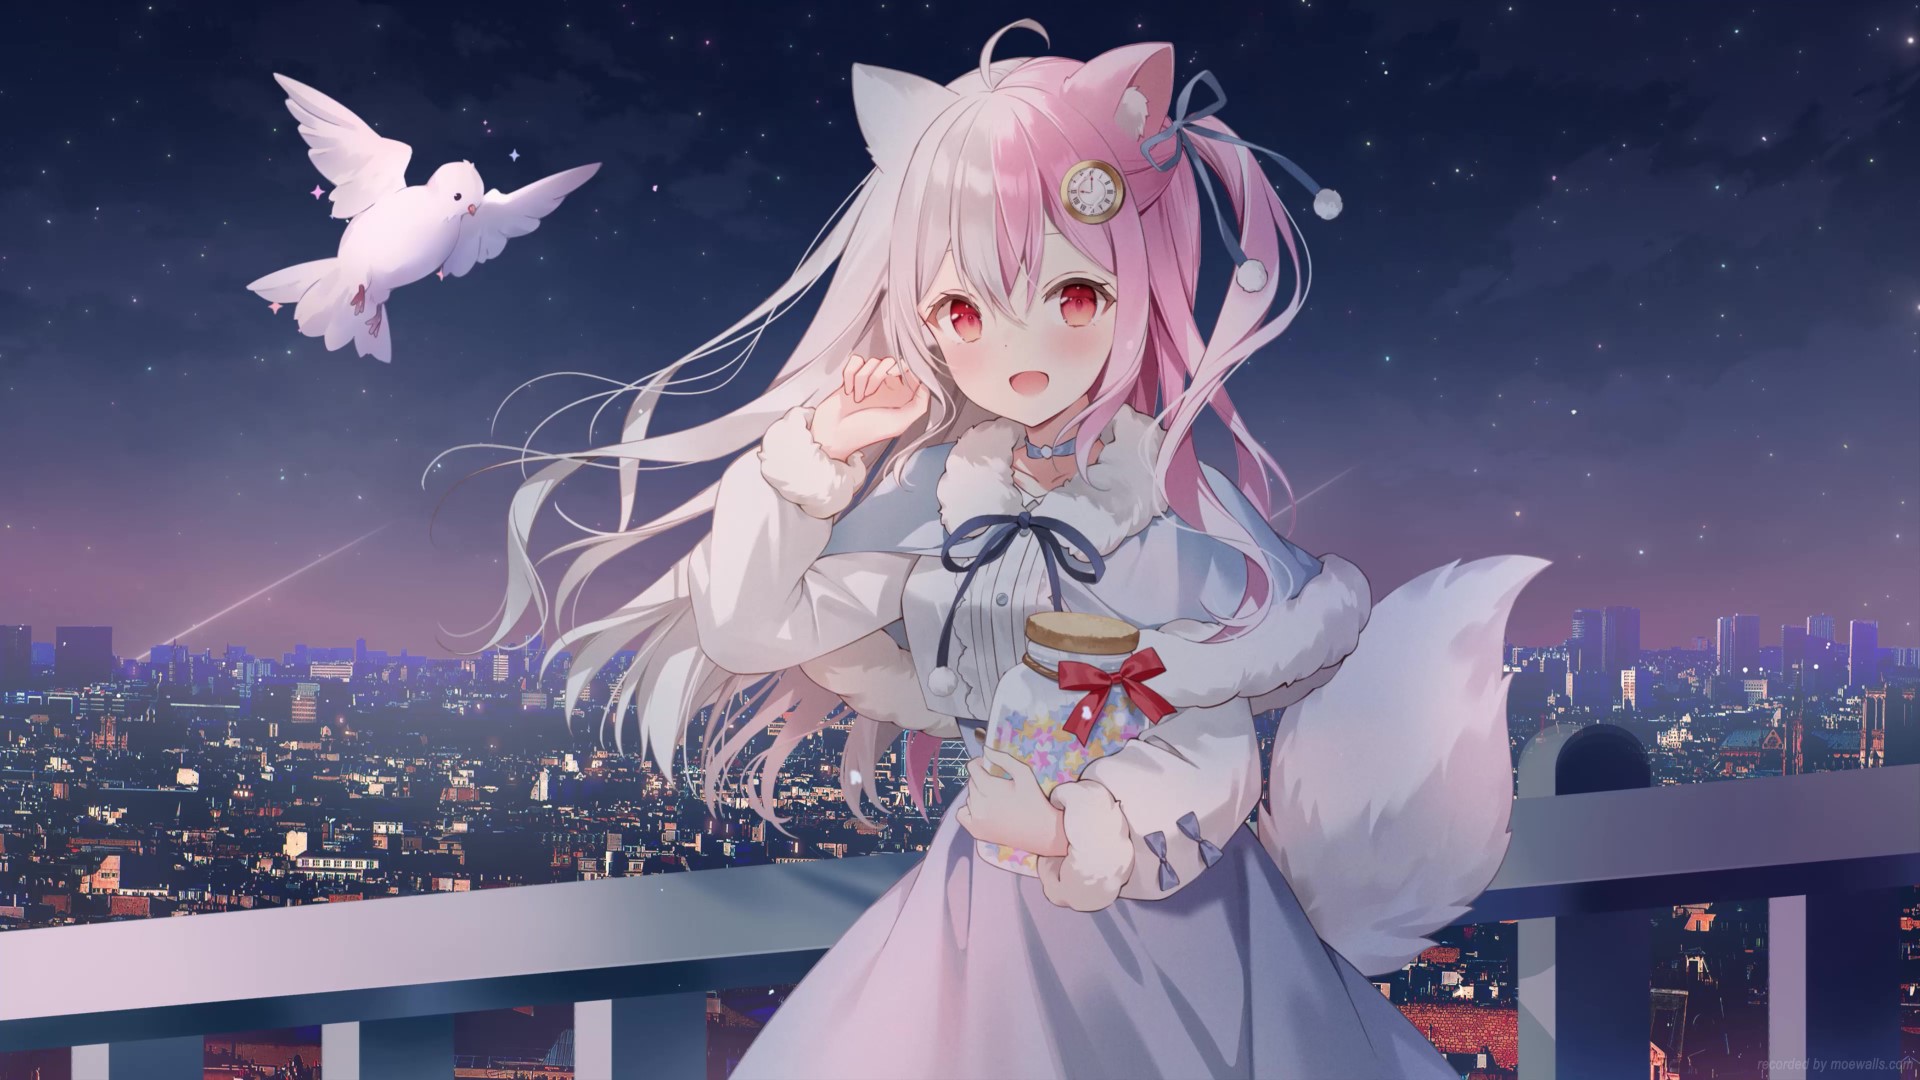 Download A Cool and snazzy Anime Fox Wallpaper | Wallpapers.com-demhanvico.com.vn